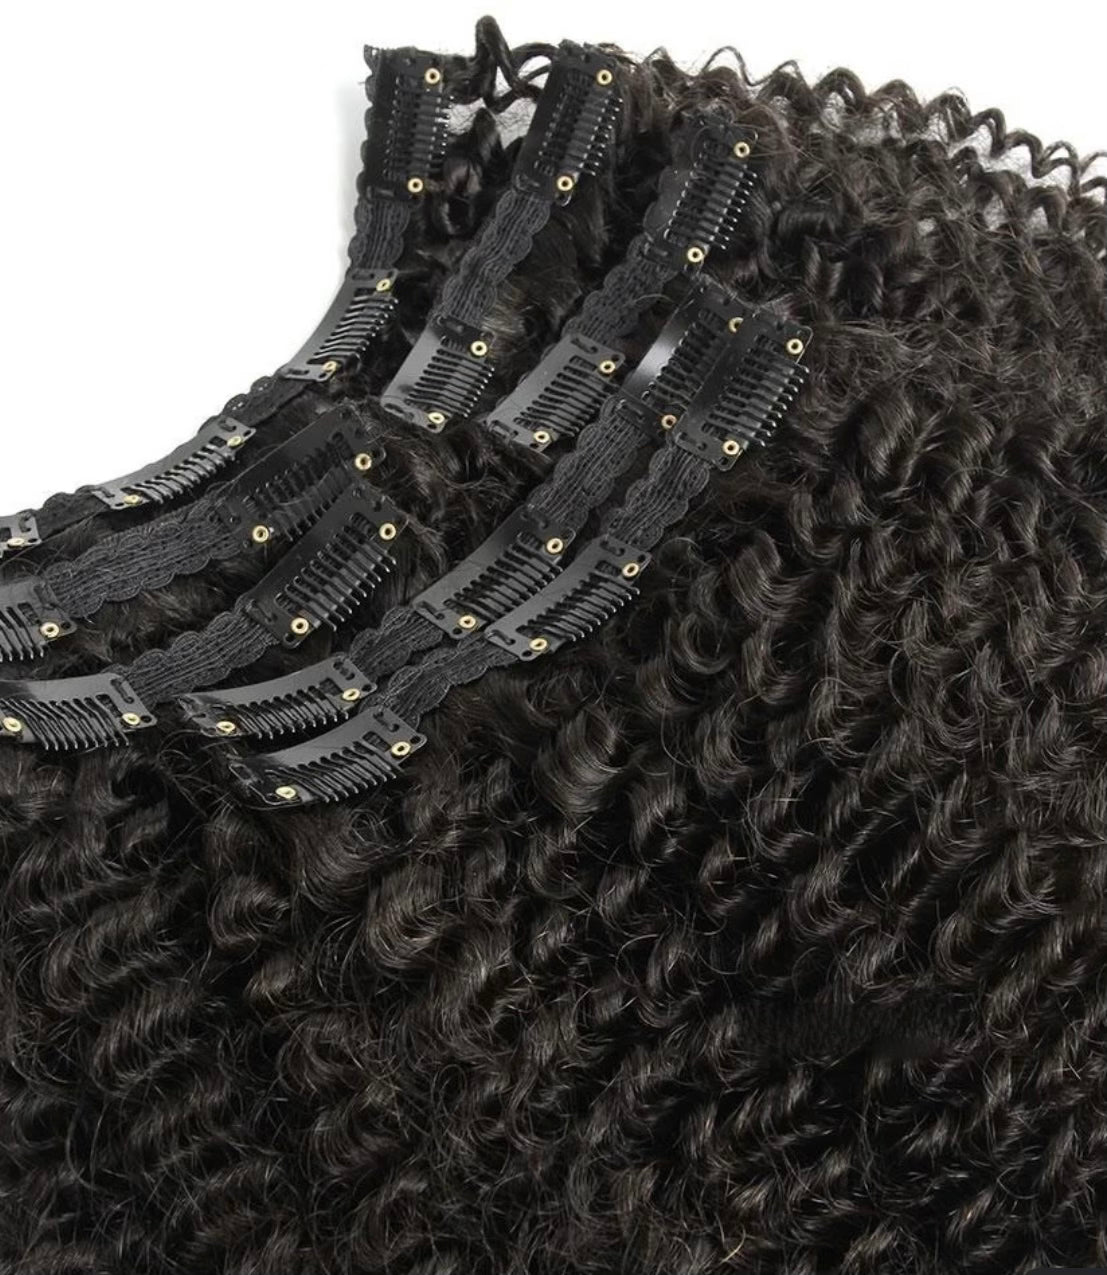 Kinky Curly Clip Ins